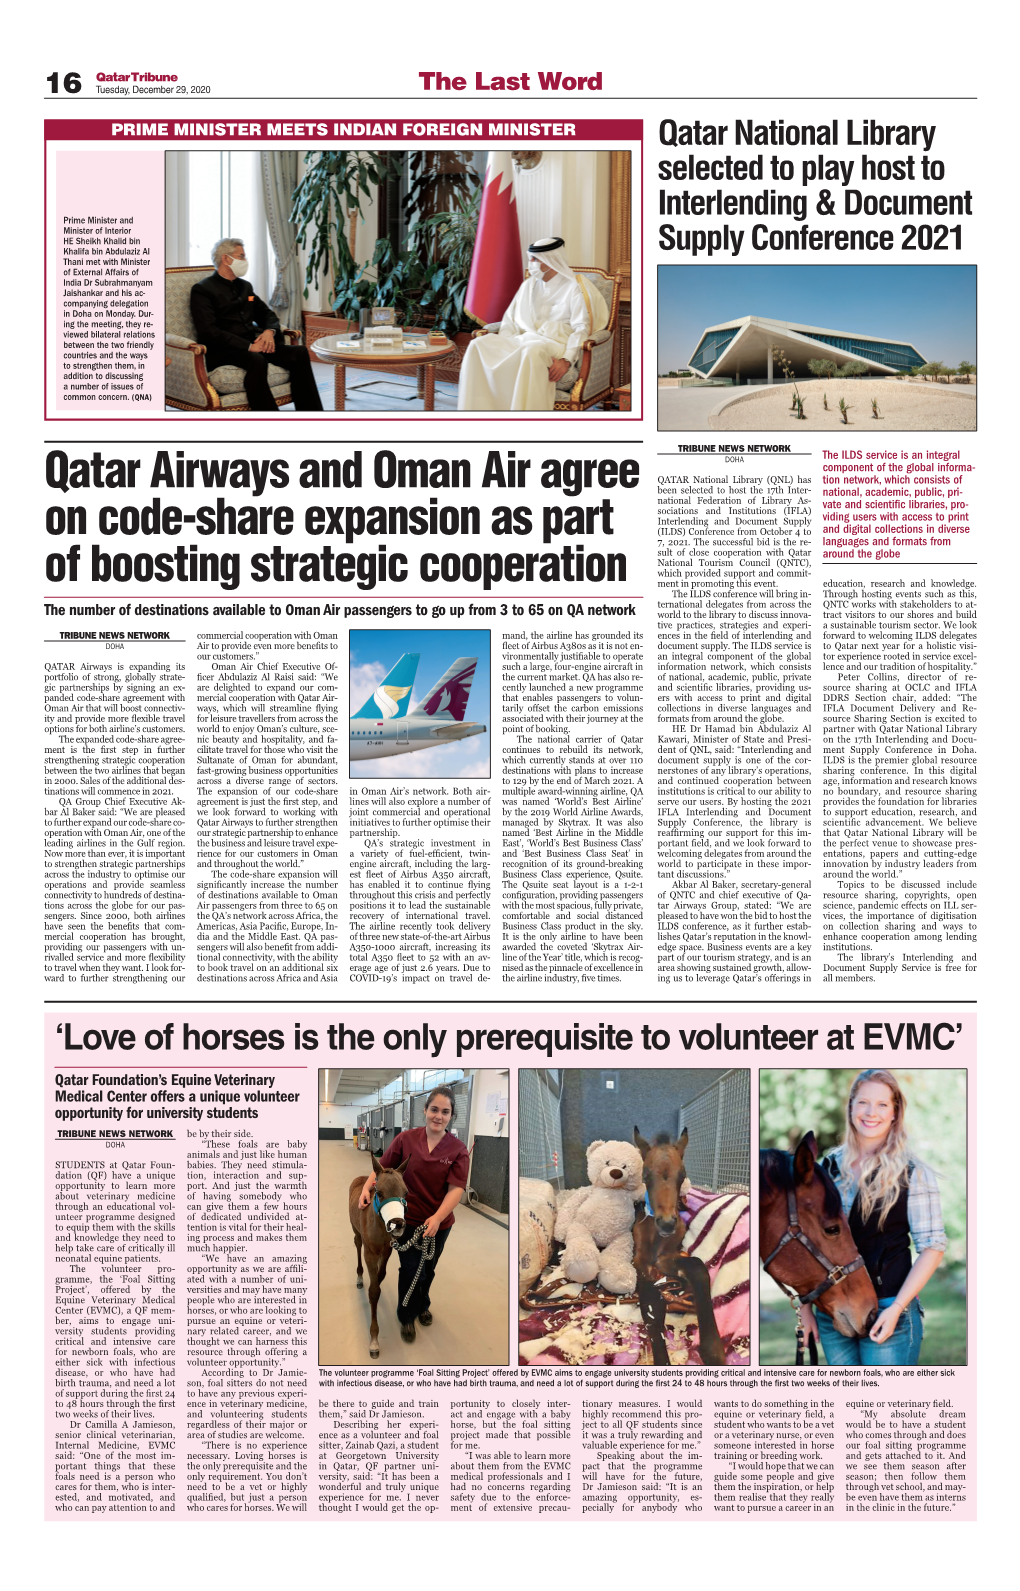 Qatar Airways and Oman Air Agree on Code-Share Expansion As Part Of